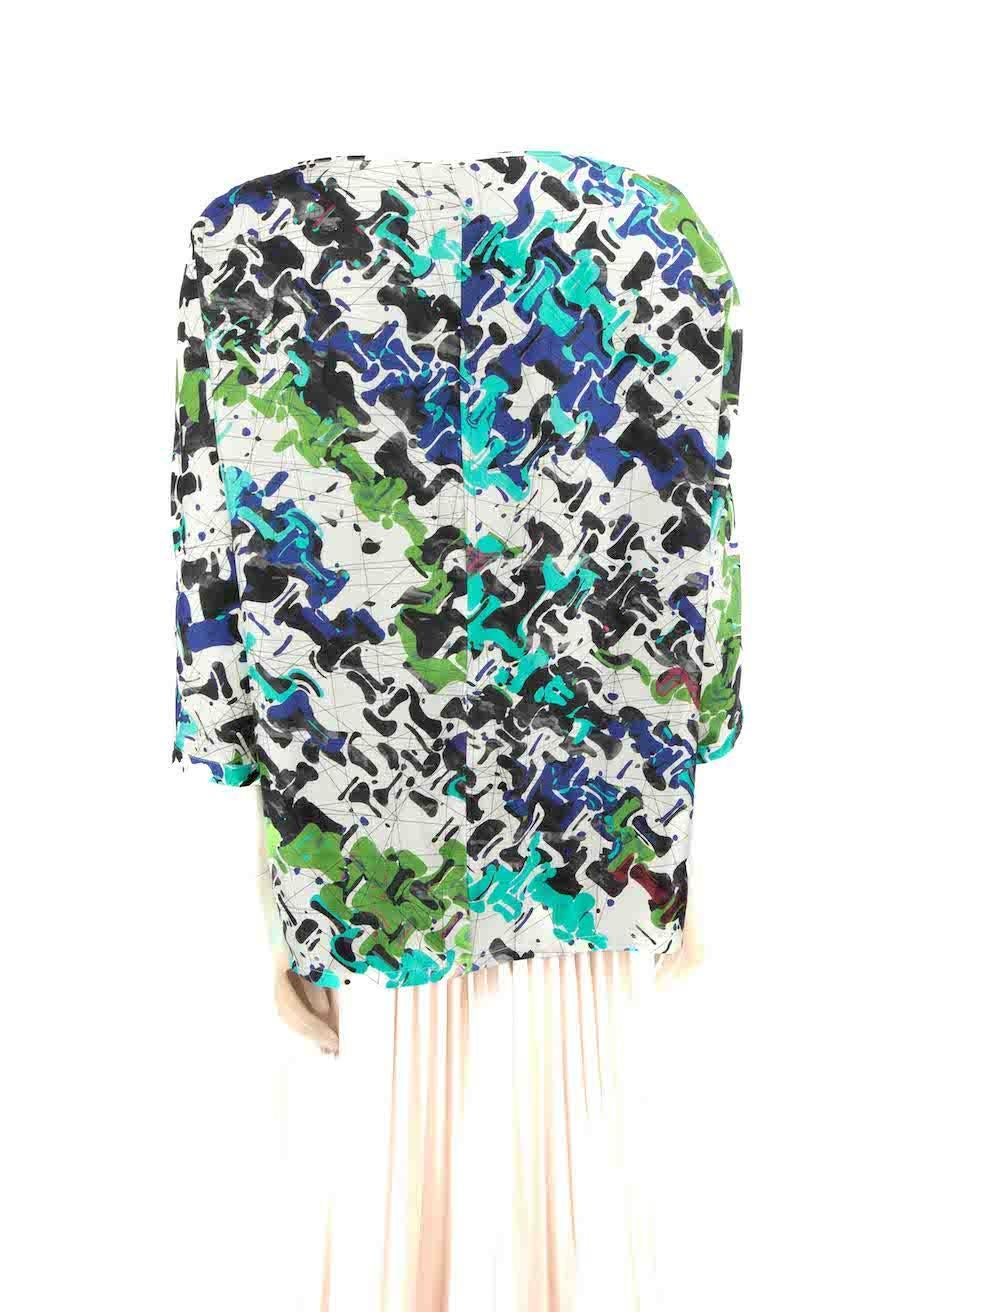 Missoni Abstract Print Silk Top Size M In Good Condition For Sale In London, GB